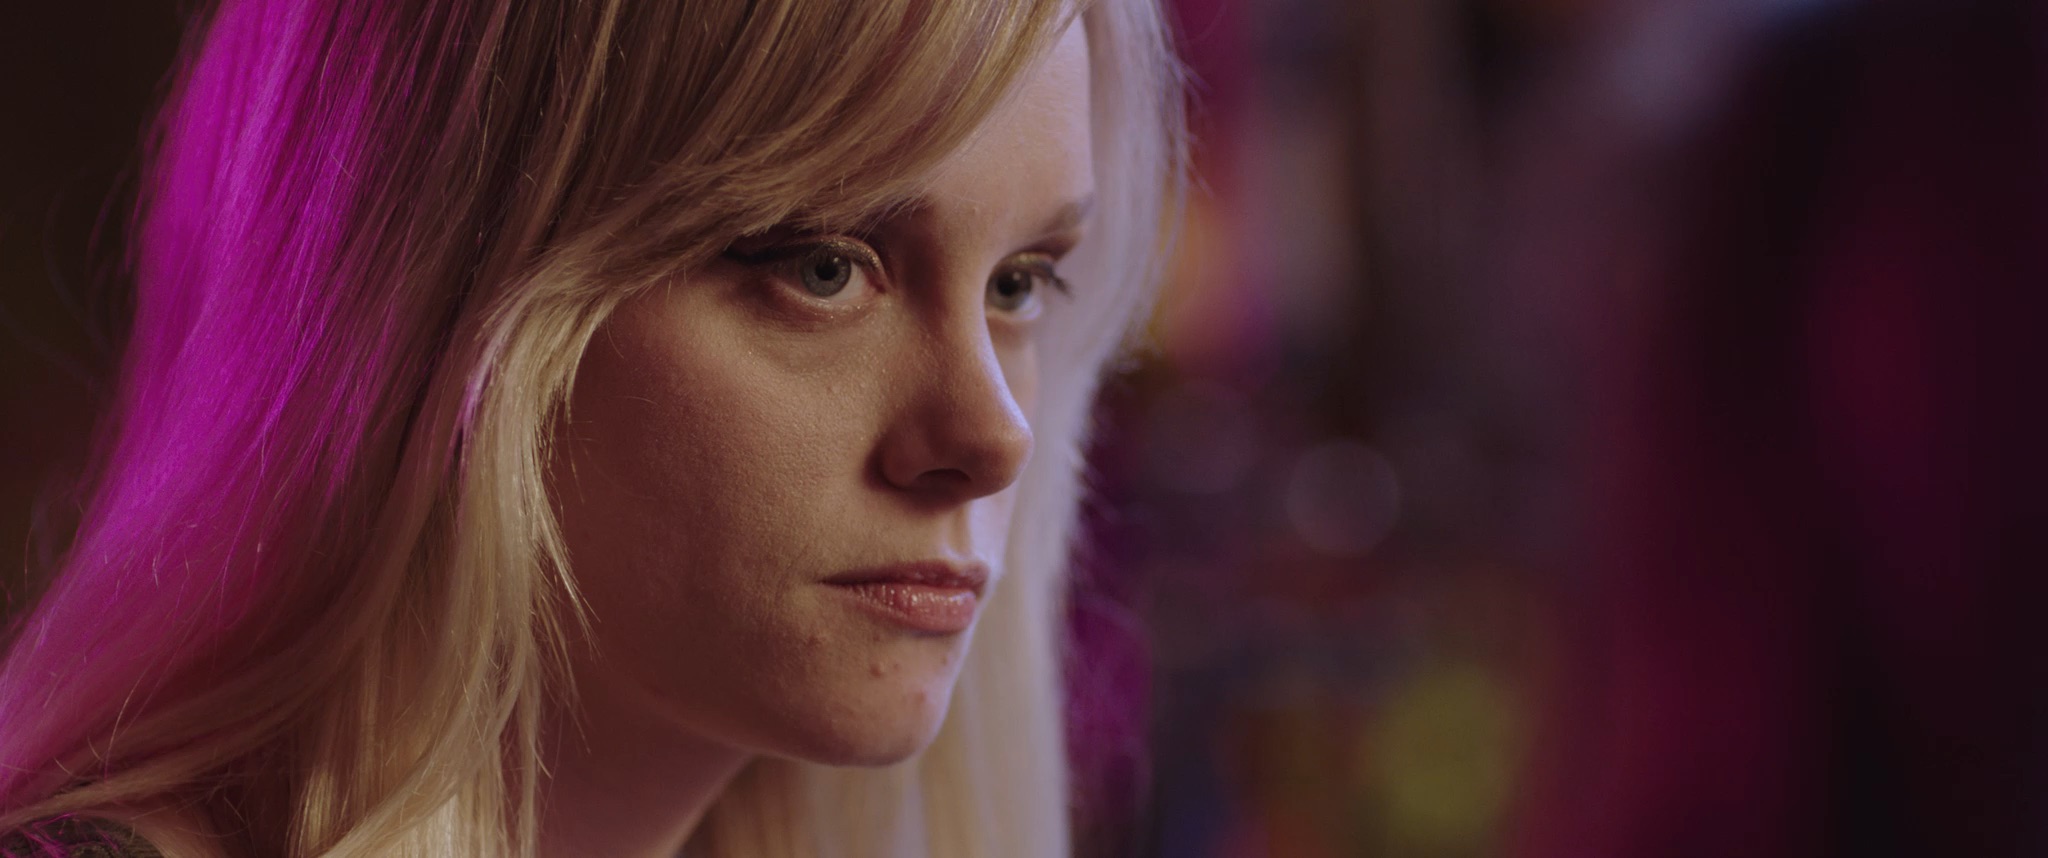 This image is a still from Sonja Kelly's proof-of-concept short film Surrender Heaven which was shot in 2017 by director of photography Peggy Peralta. It features a young blonde woman in a bar looking at another person.